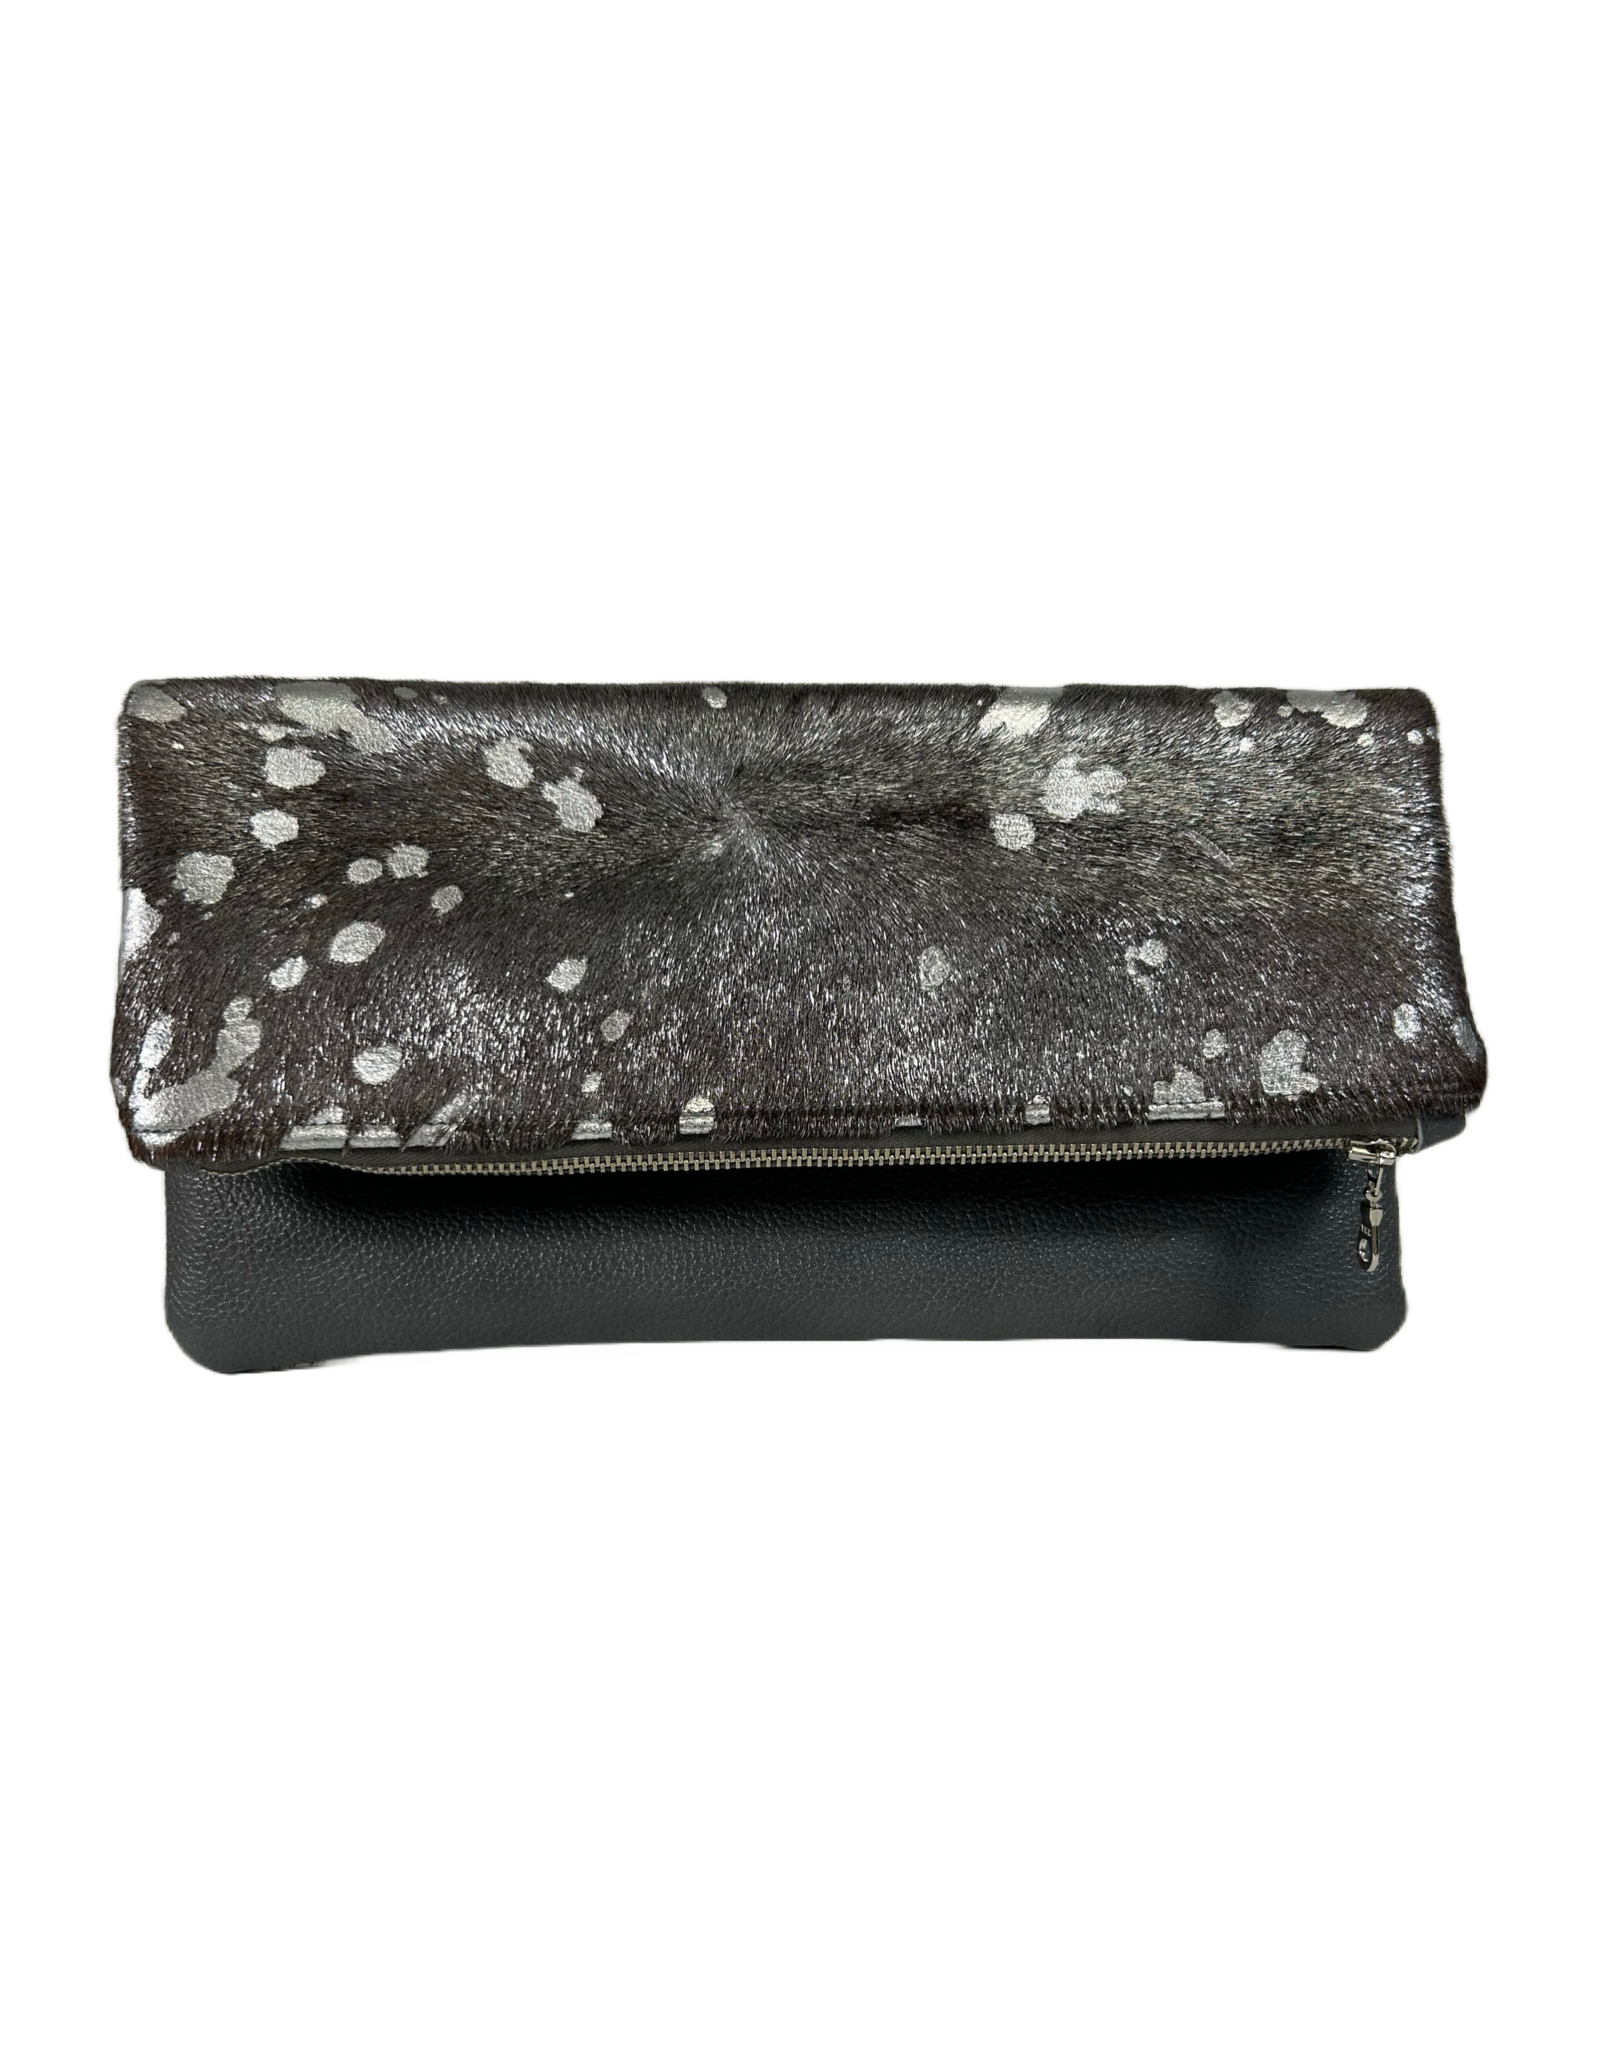 Re:new Project Ahlam Leather Clutch